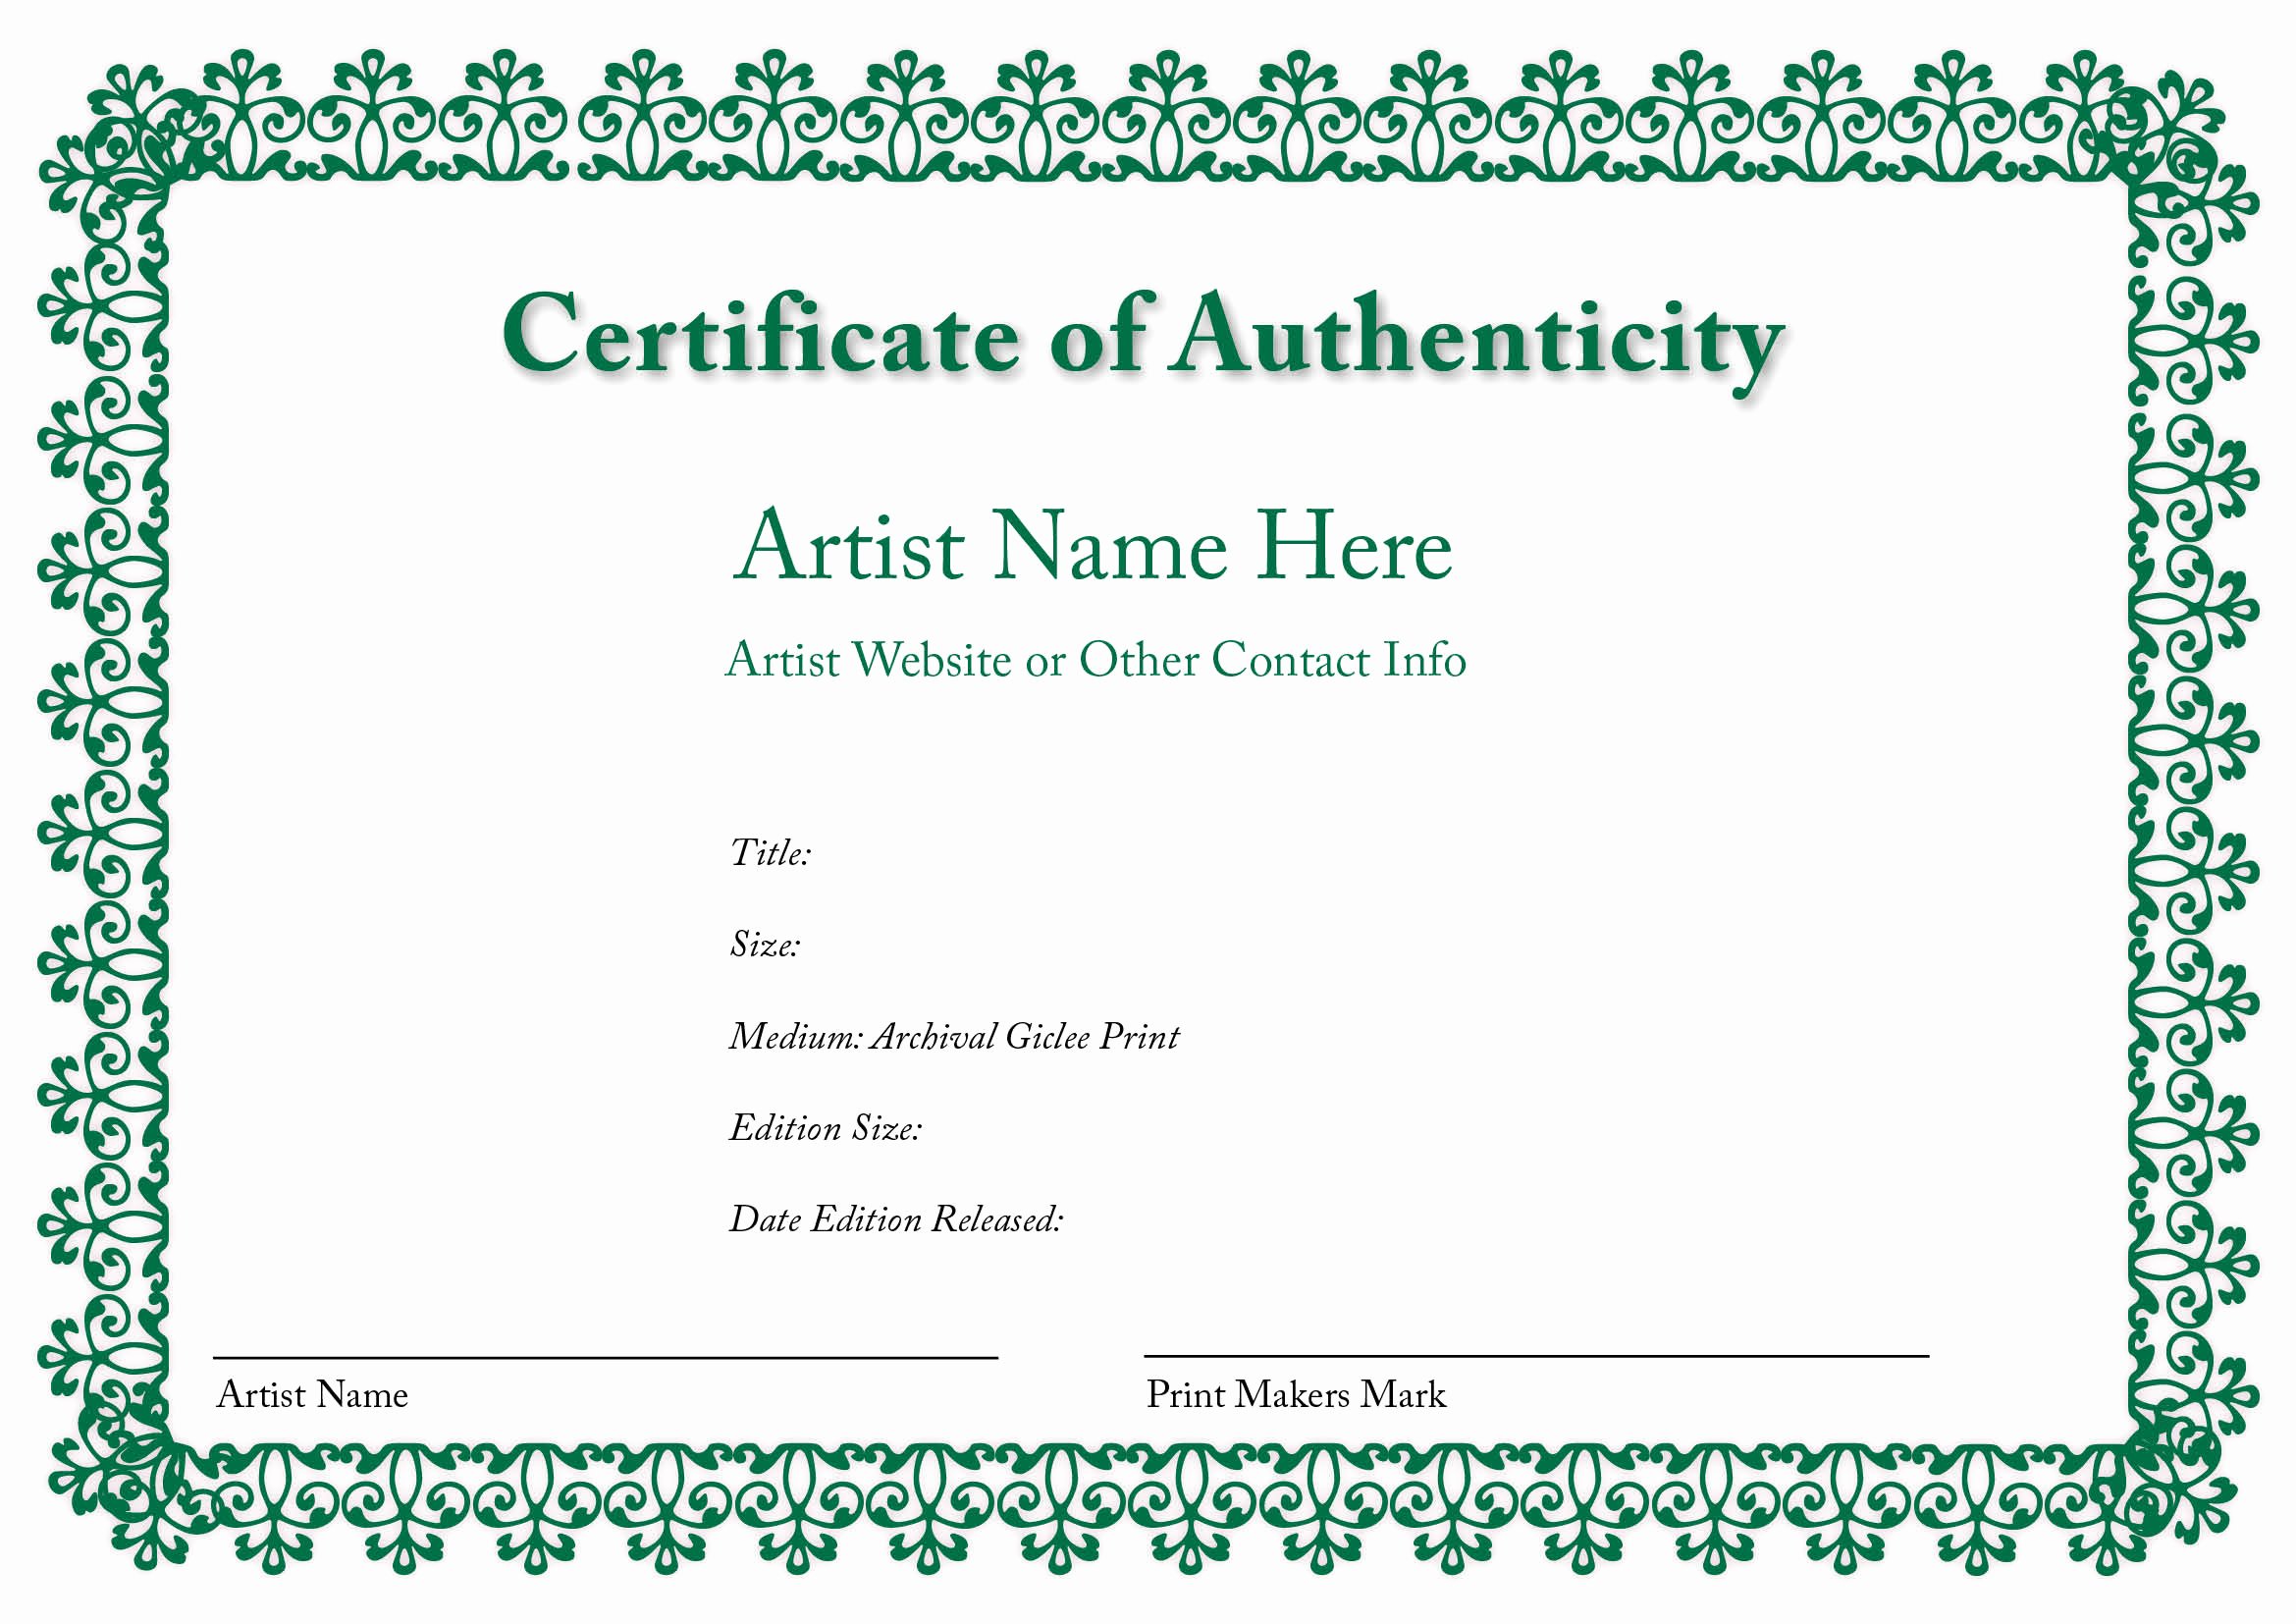 Certificate Of Authenticity Template Fresh Blank Certificates Of Authenticity